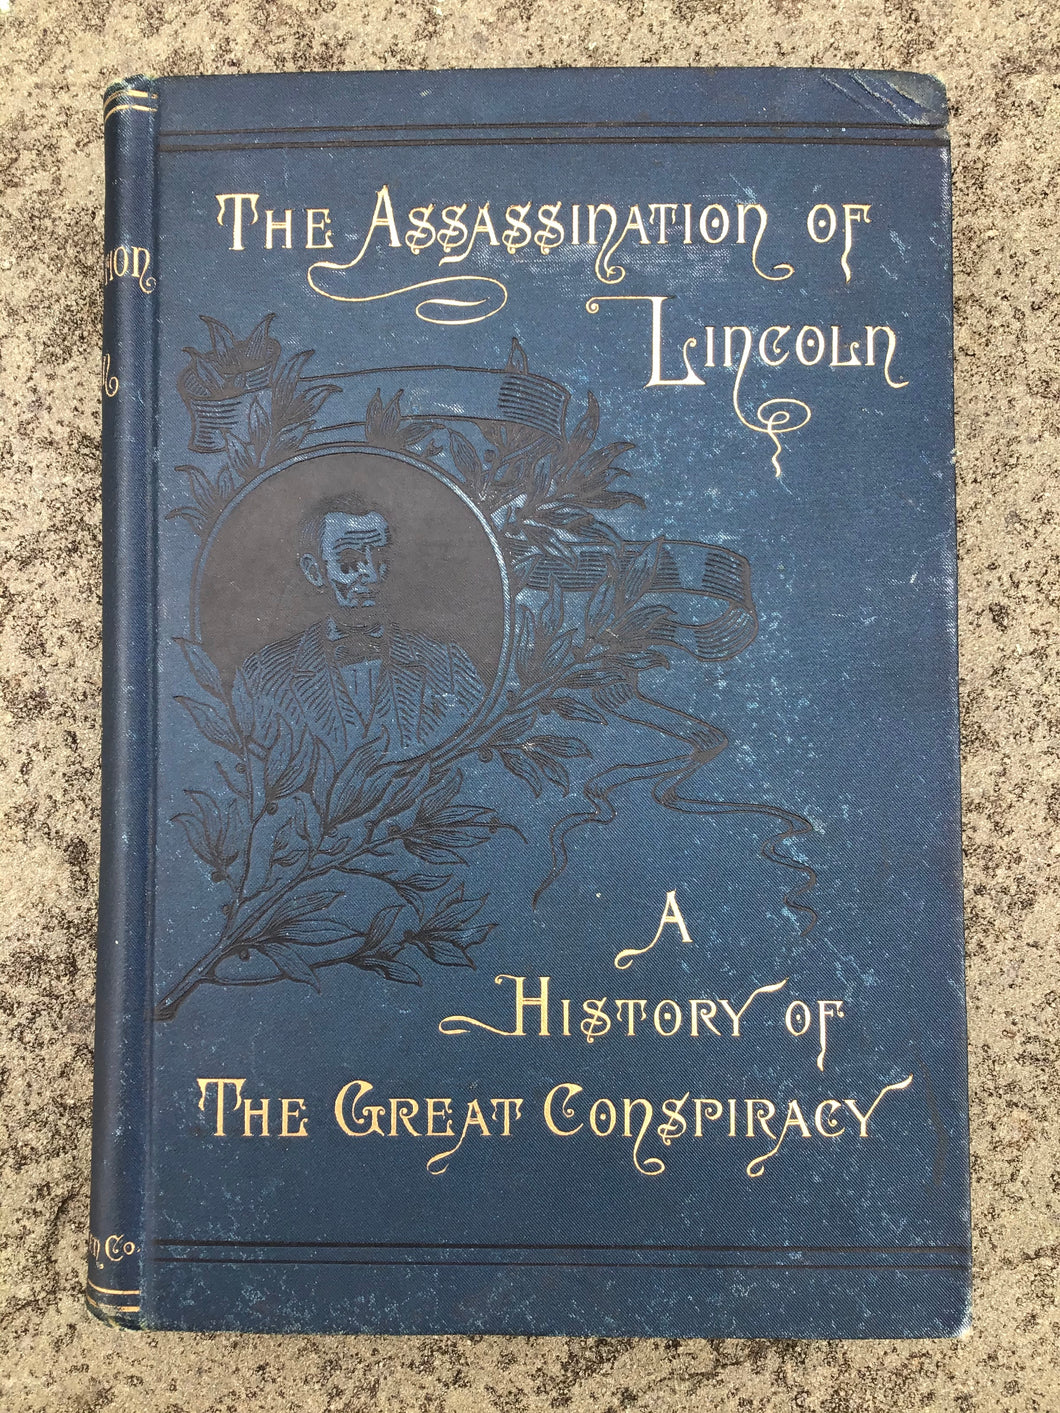 The Assassination of Lincoln A History of the Great Conspiracy book by T.M. Harris 1892